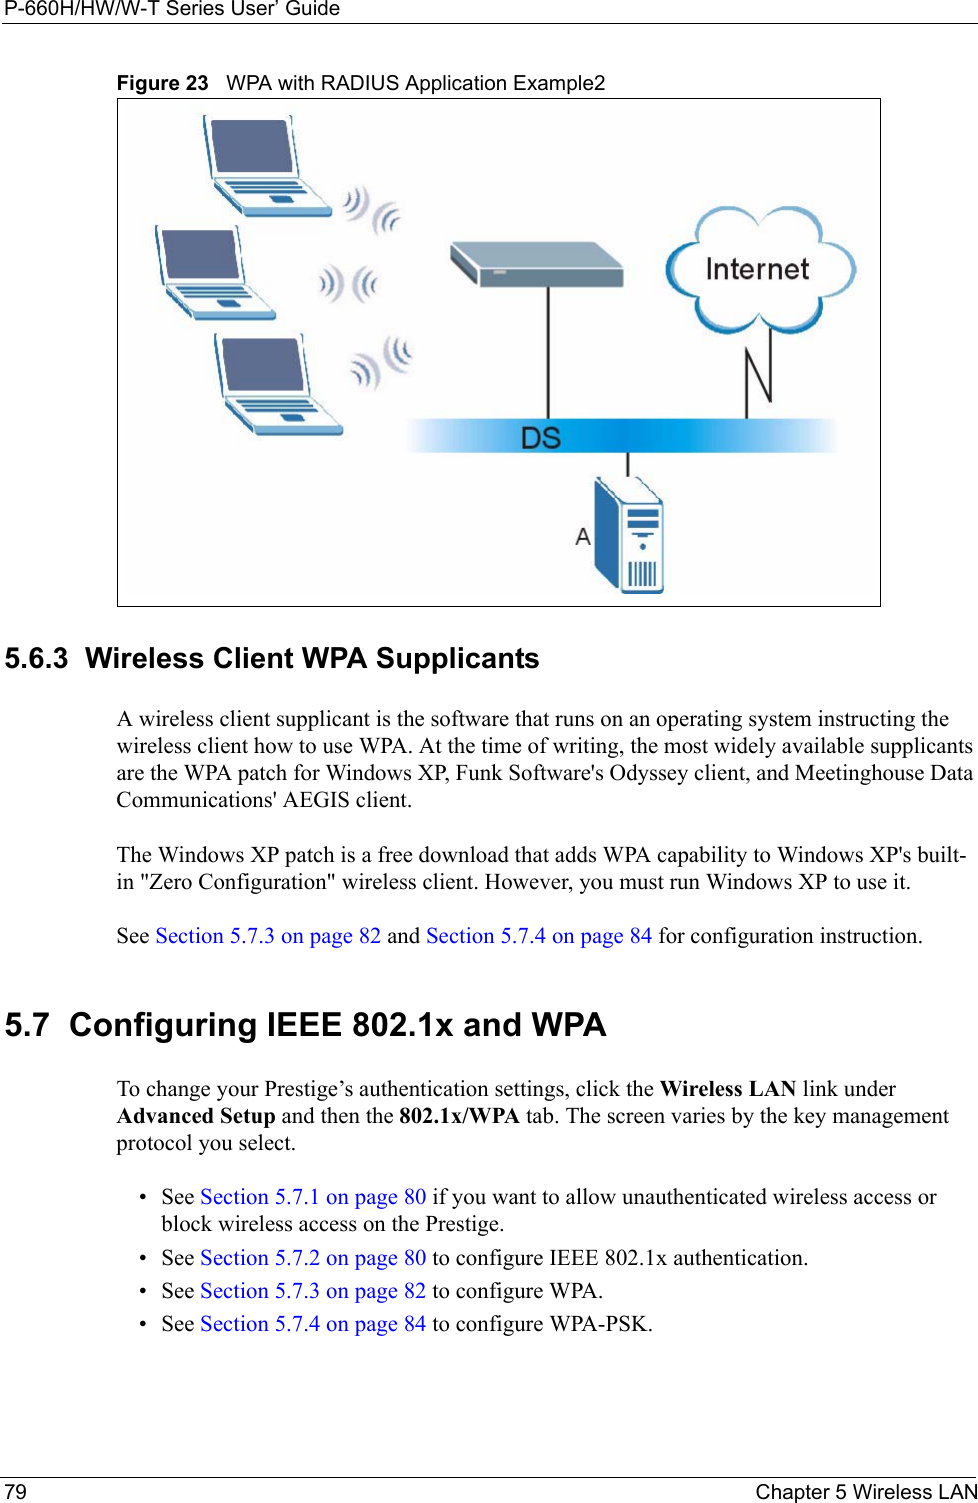 P-660H/HW/W-T Series User’ Guide79 Chapter 5 Wireless LANFigure 23   WPA with RADIUS Application Example25.6.3  Wireless Client WPA Supplicants A wireless client supplicant is the software that runs on an operating system instructing the wireless client how to use WPA. At the time of writing, the most widely available supplicants are the WPA patch for Windows XP, Funk Software&apos;s Odyssey client, and Meetinghouse Data Communications&apos; AEGIS client. The Windows XP patch is a free download that adds WPA capability to Windows XP&apos;s built-in &quot;Zero Configuration&quot; wireless client. However, you must run Windows XP to use it.See Section 5.7.3 on page 82 and Section 5.7.4 on page 84 for configuration instruction. 5.7  Configuring IEEE 802.1x and WPA To change your Prestige’s authentication settings, click the Wireless LAN link under Advanced Setup and then the 802.1x/WPA tab. The screen varies by the key management protocol you select.• See Section 5.7.1 on page 80 if you want to allow unauthenticated wireless access or block wireless access on the Prestige. • See Section 5.7.2 on page 80 to configure IEEE 802.1x authentication. • See Section 5.7.3 on page 82 to configure WPA. • See Section 5.7.4 on page 84 to configure WPA-PSK. 